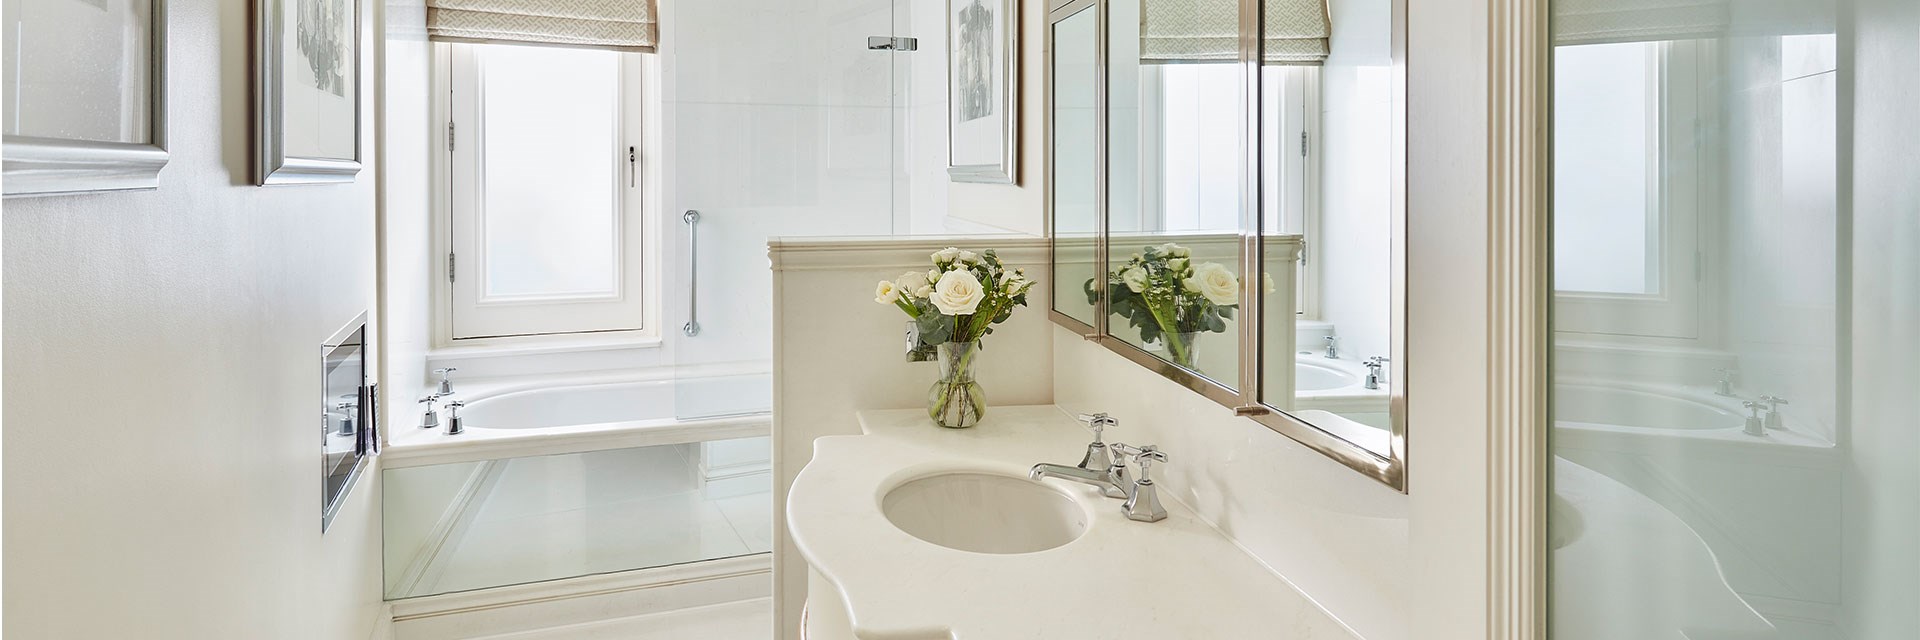 bath, sinks and a vase of flowers